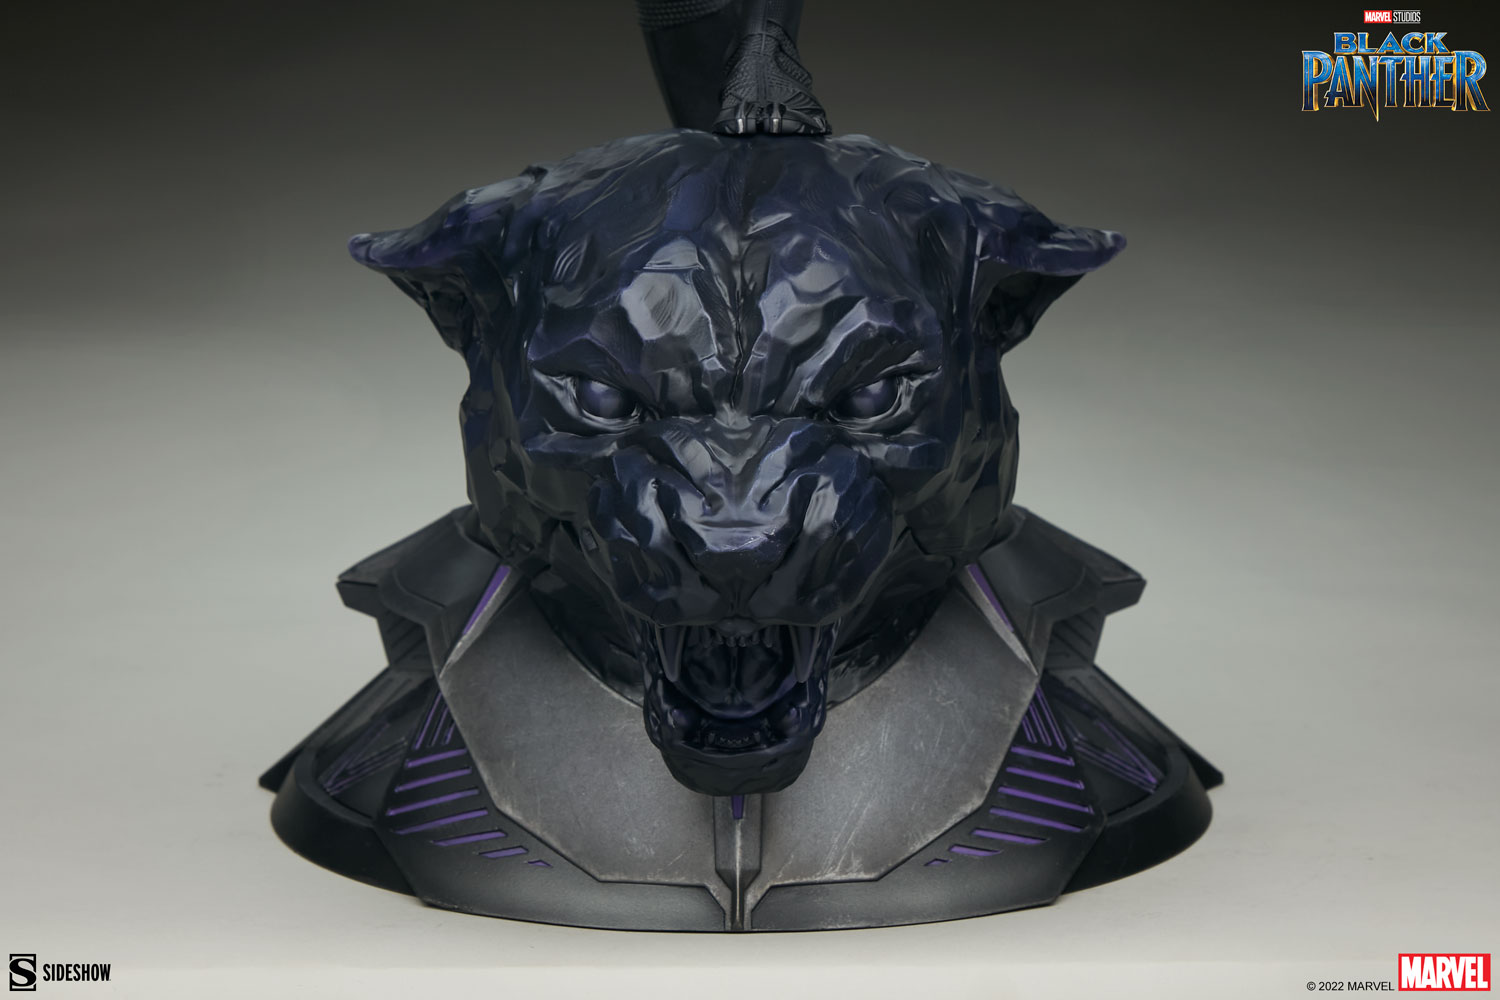 Black Panther Premium Format Figure by Sideshow